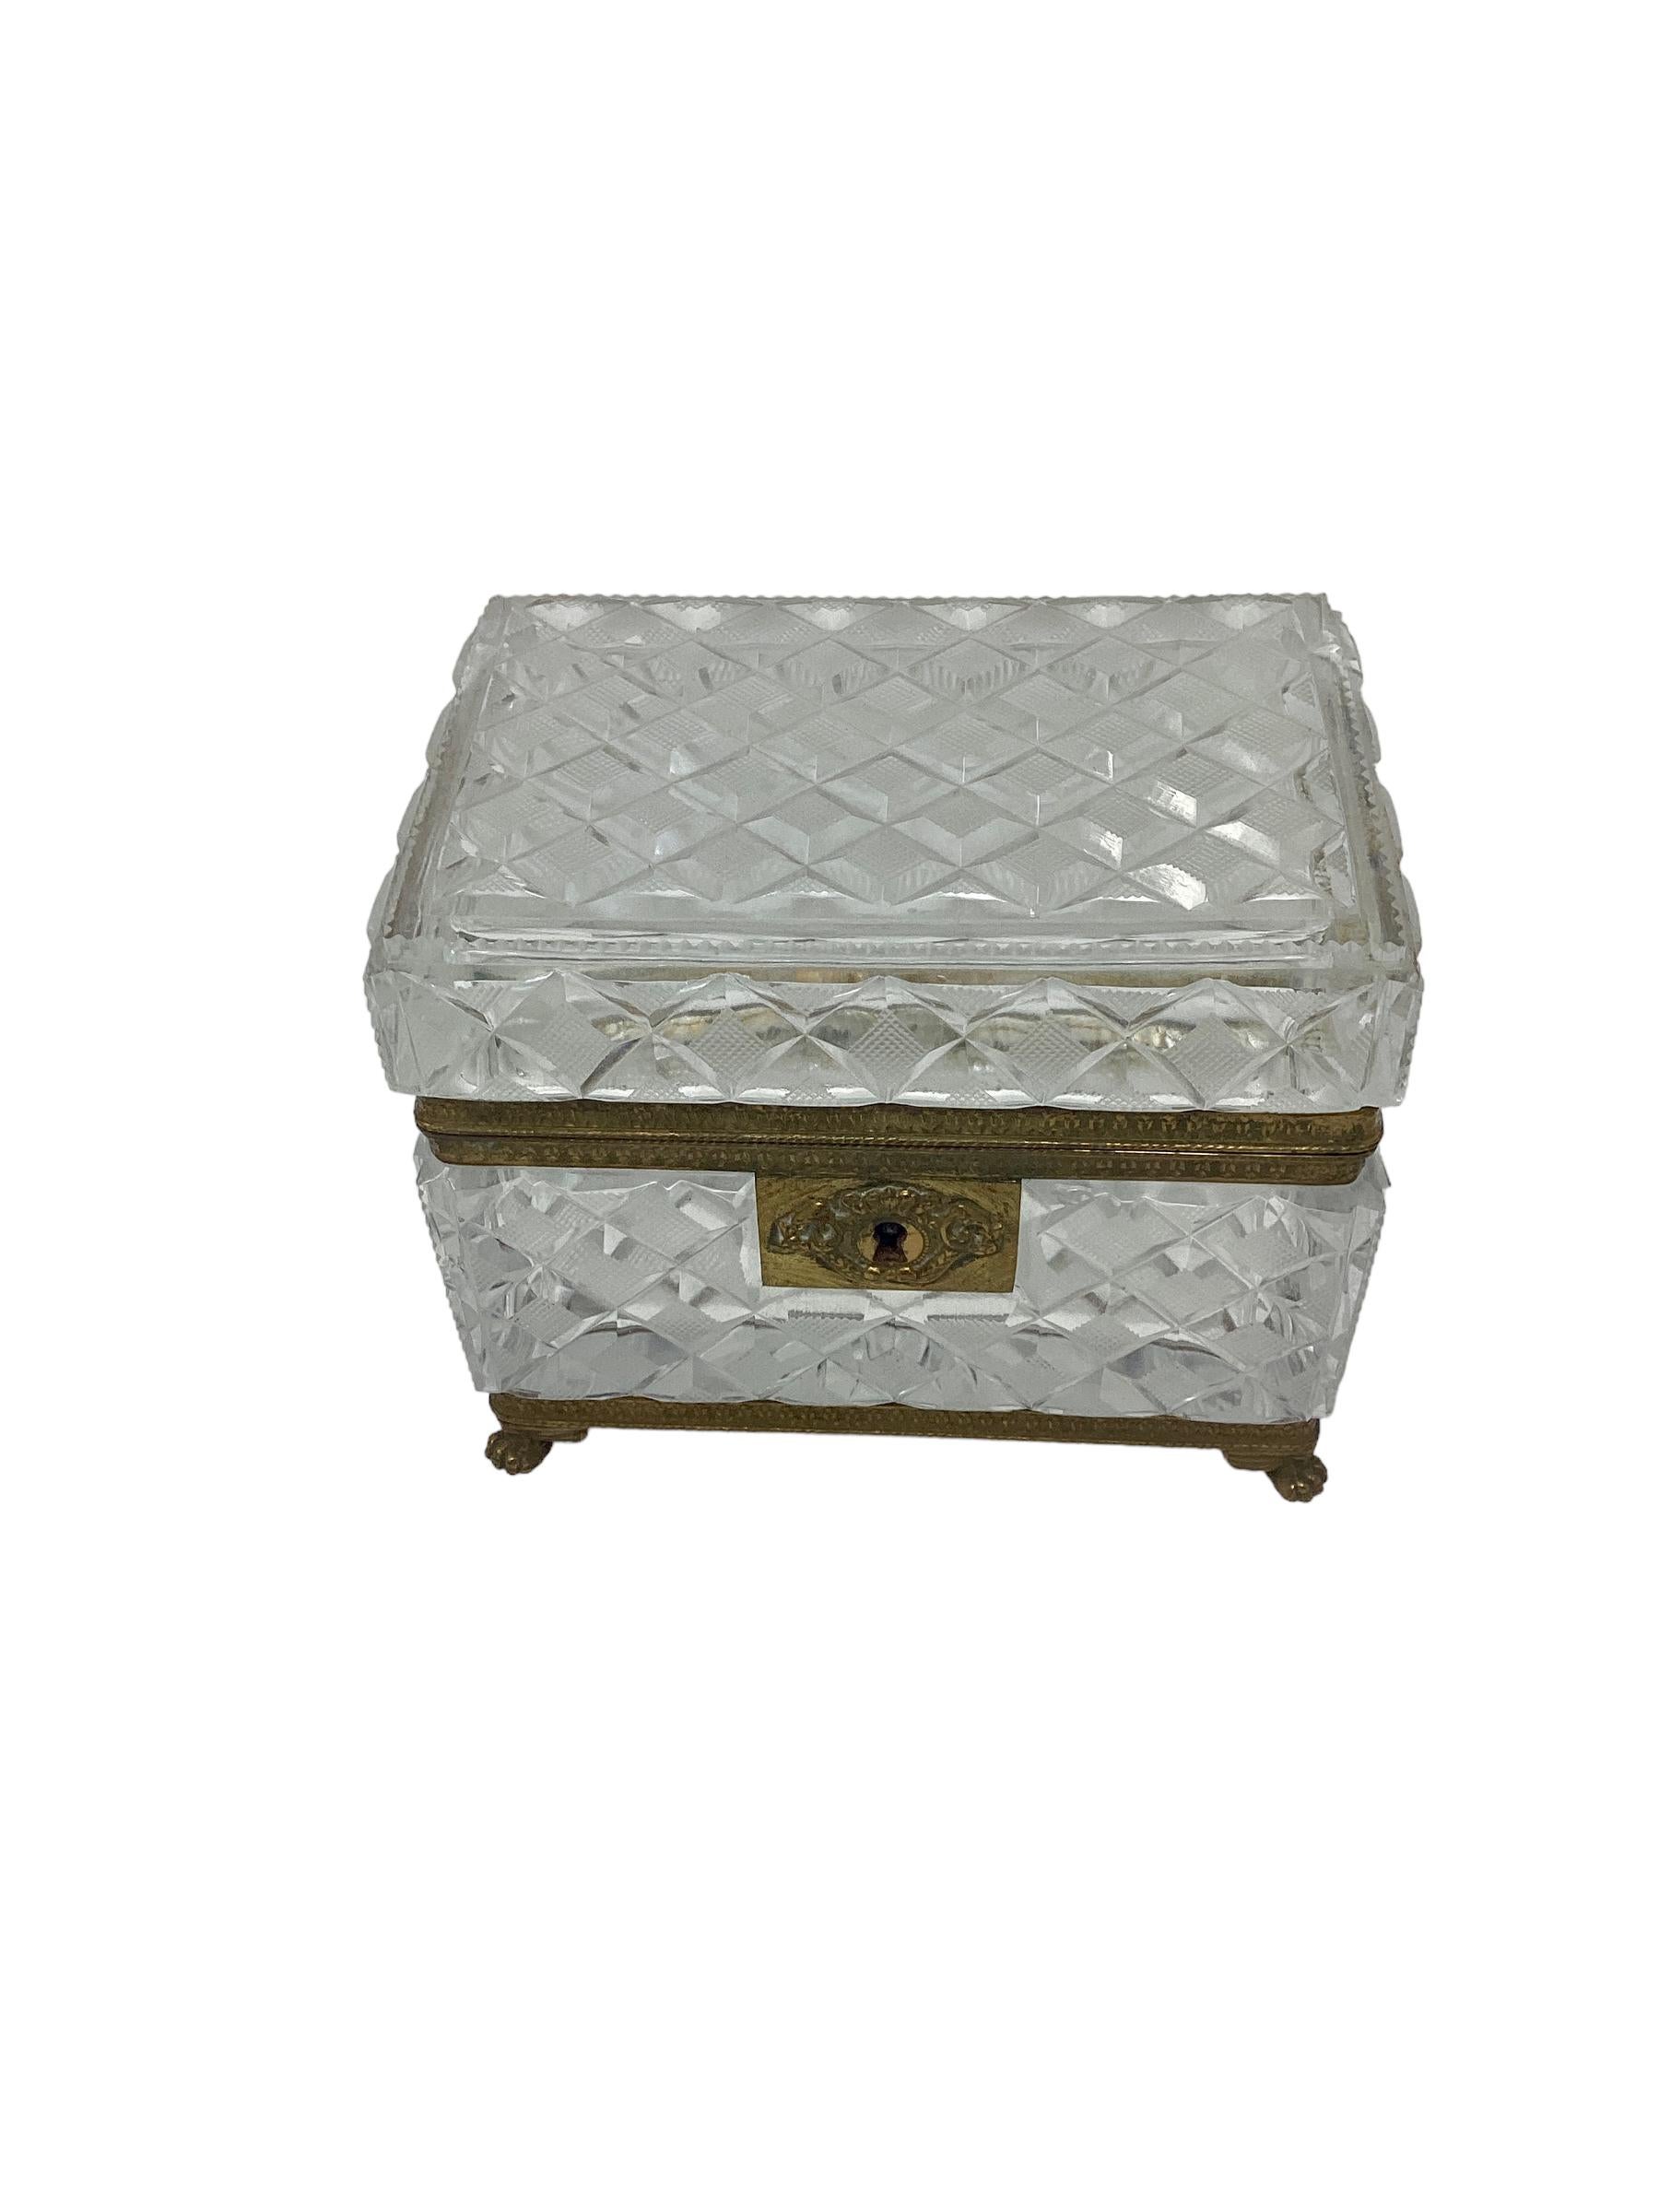 19th Century Baccarat Cut Crystal Box or Casket with Gilt Bronze Mounts. Beautiful cut crystal box in a faceted design. Box is mounted in a gilt bronze frame with paw feet.